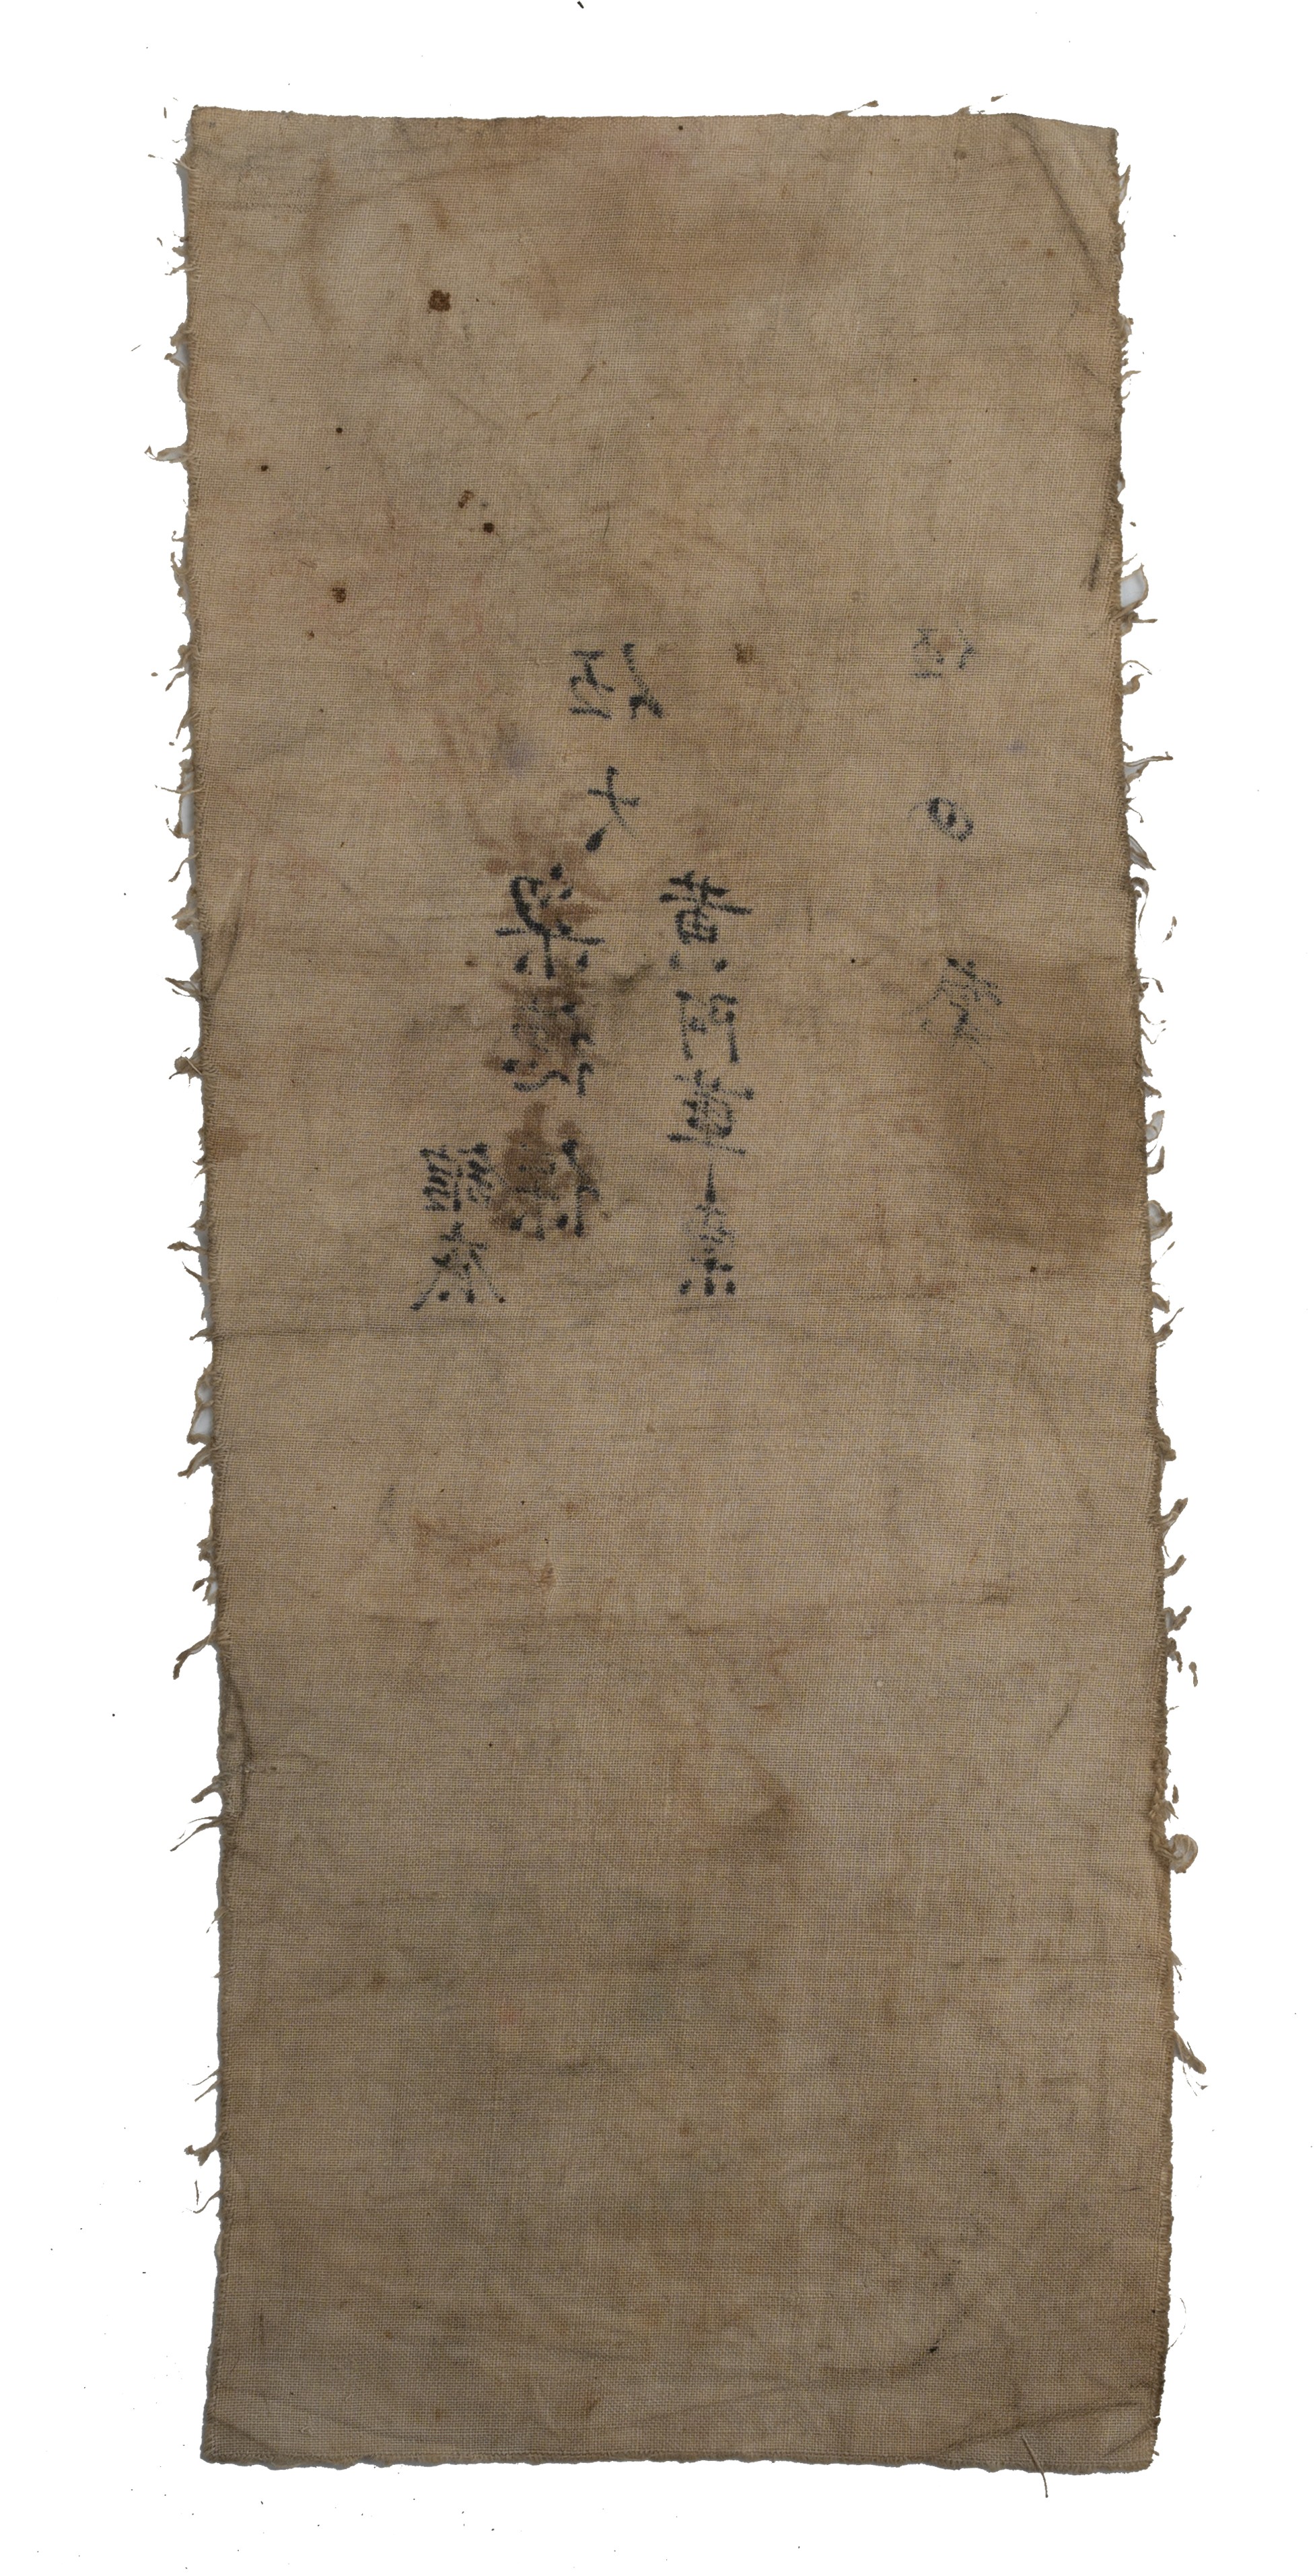 AN IMPORTANT AND RARE CHINESE TEXTILE DOCUMENT, YIXING GONGSI. A certificate or diploma for the - Image 2 of 2